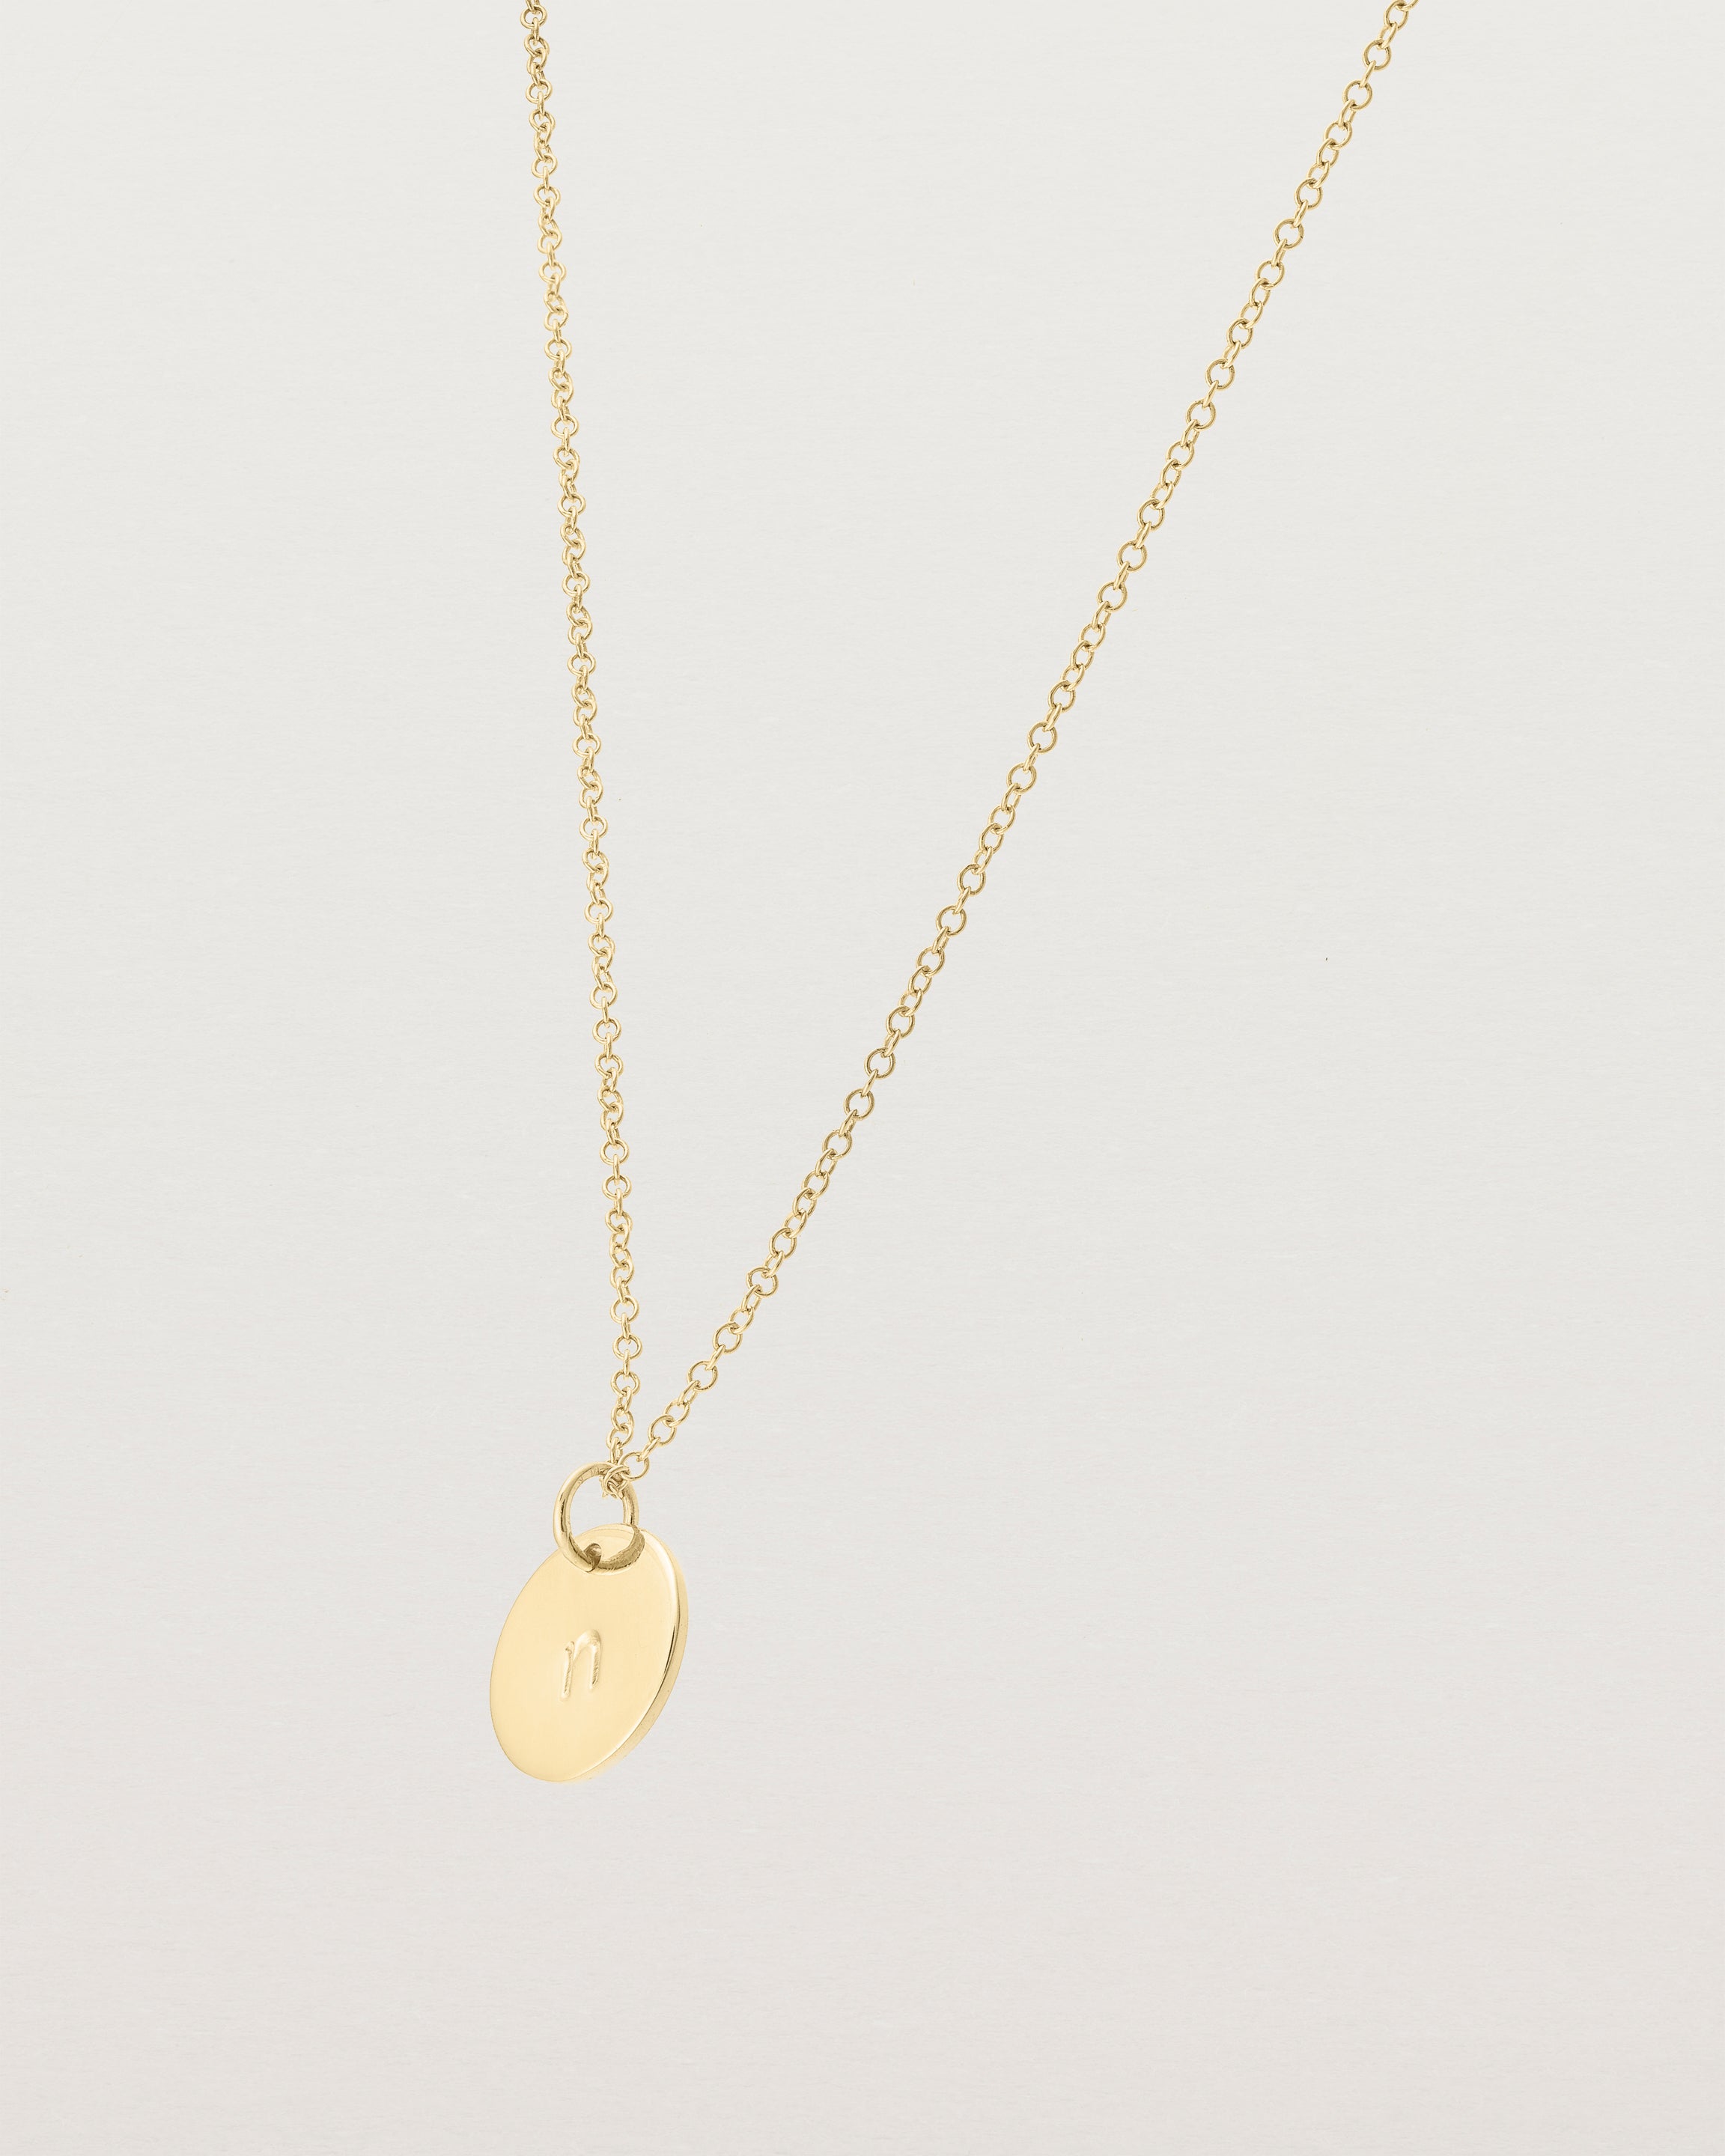 Angled view of the Mini Initial Necklace in Yellow Gold.